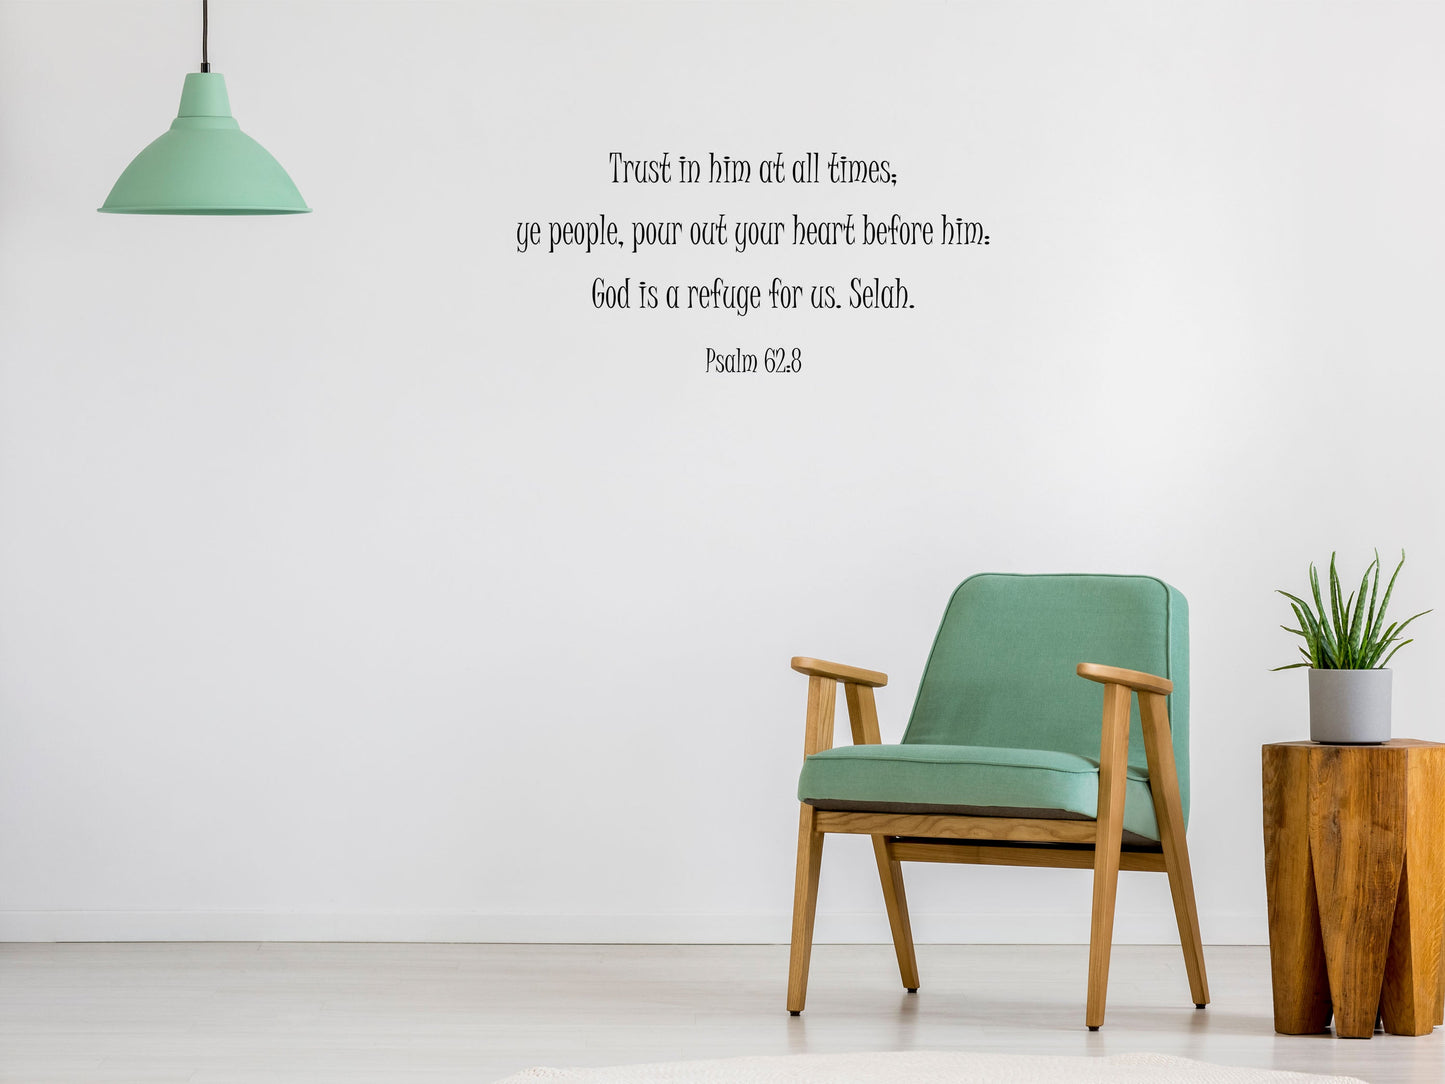 Psalm 62:8 - Scripture Wall Decals Vinyl Wall Decal Inspirational Wall Signs 